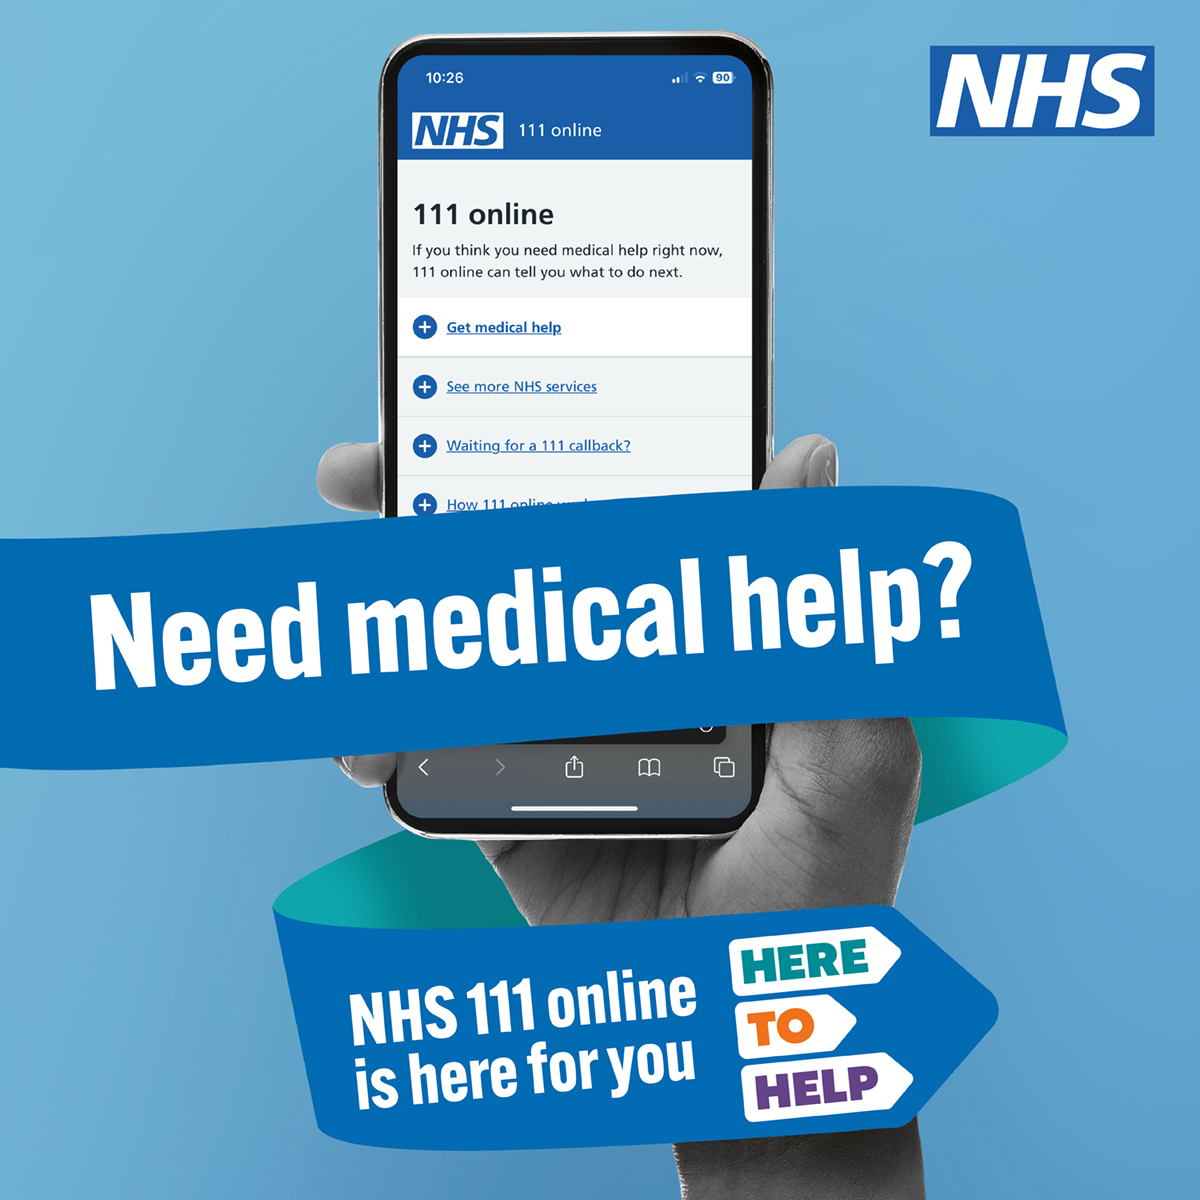 ⚠️We are experiencing significant pressure at our A&E departments ⚠️ If your needs aren't urgent you will experience a significant wait. Please use NHS 111 online for advice first. Please be kind to our staff they are making sure the most sick are seen first. 💙